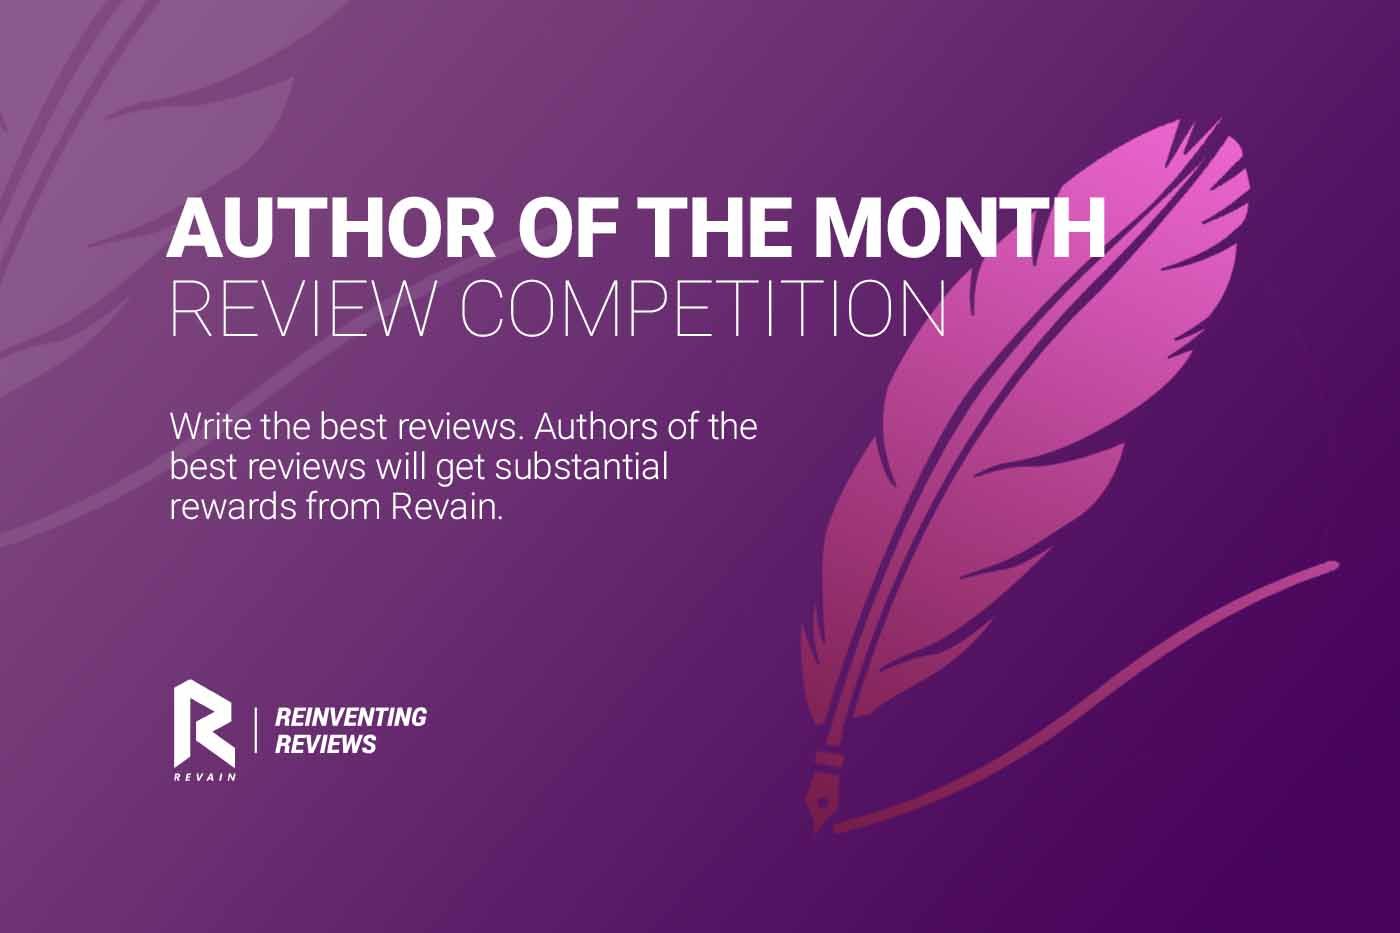 Article REVAIN AUTHOR OF THE MONTH COMPETITION